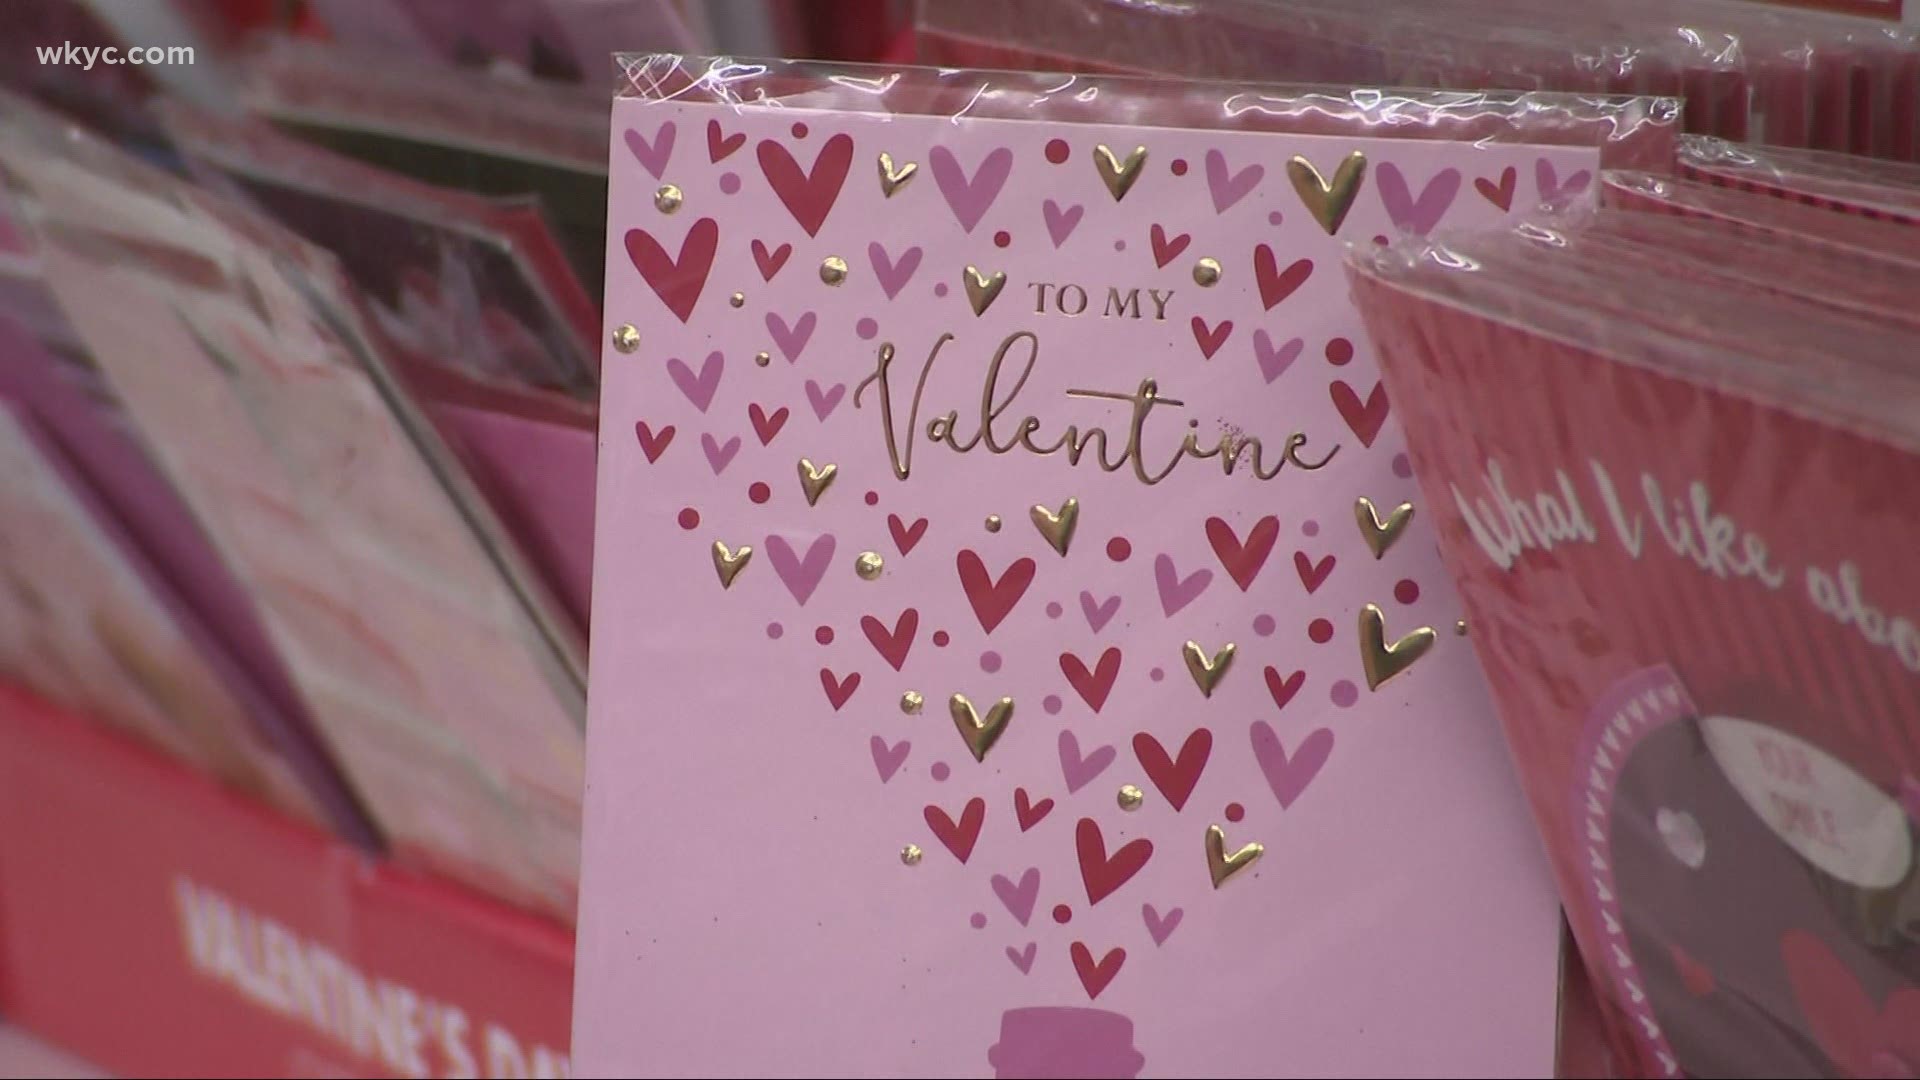 Experts say "there's no longer a price tag on affection." Danielle Serino shows you ways you can save while still showing you care this Valentine's Day.